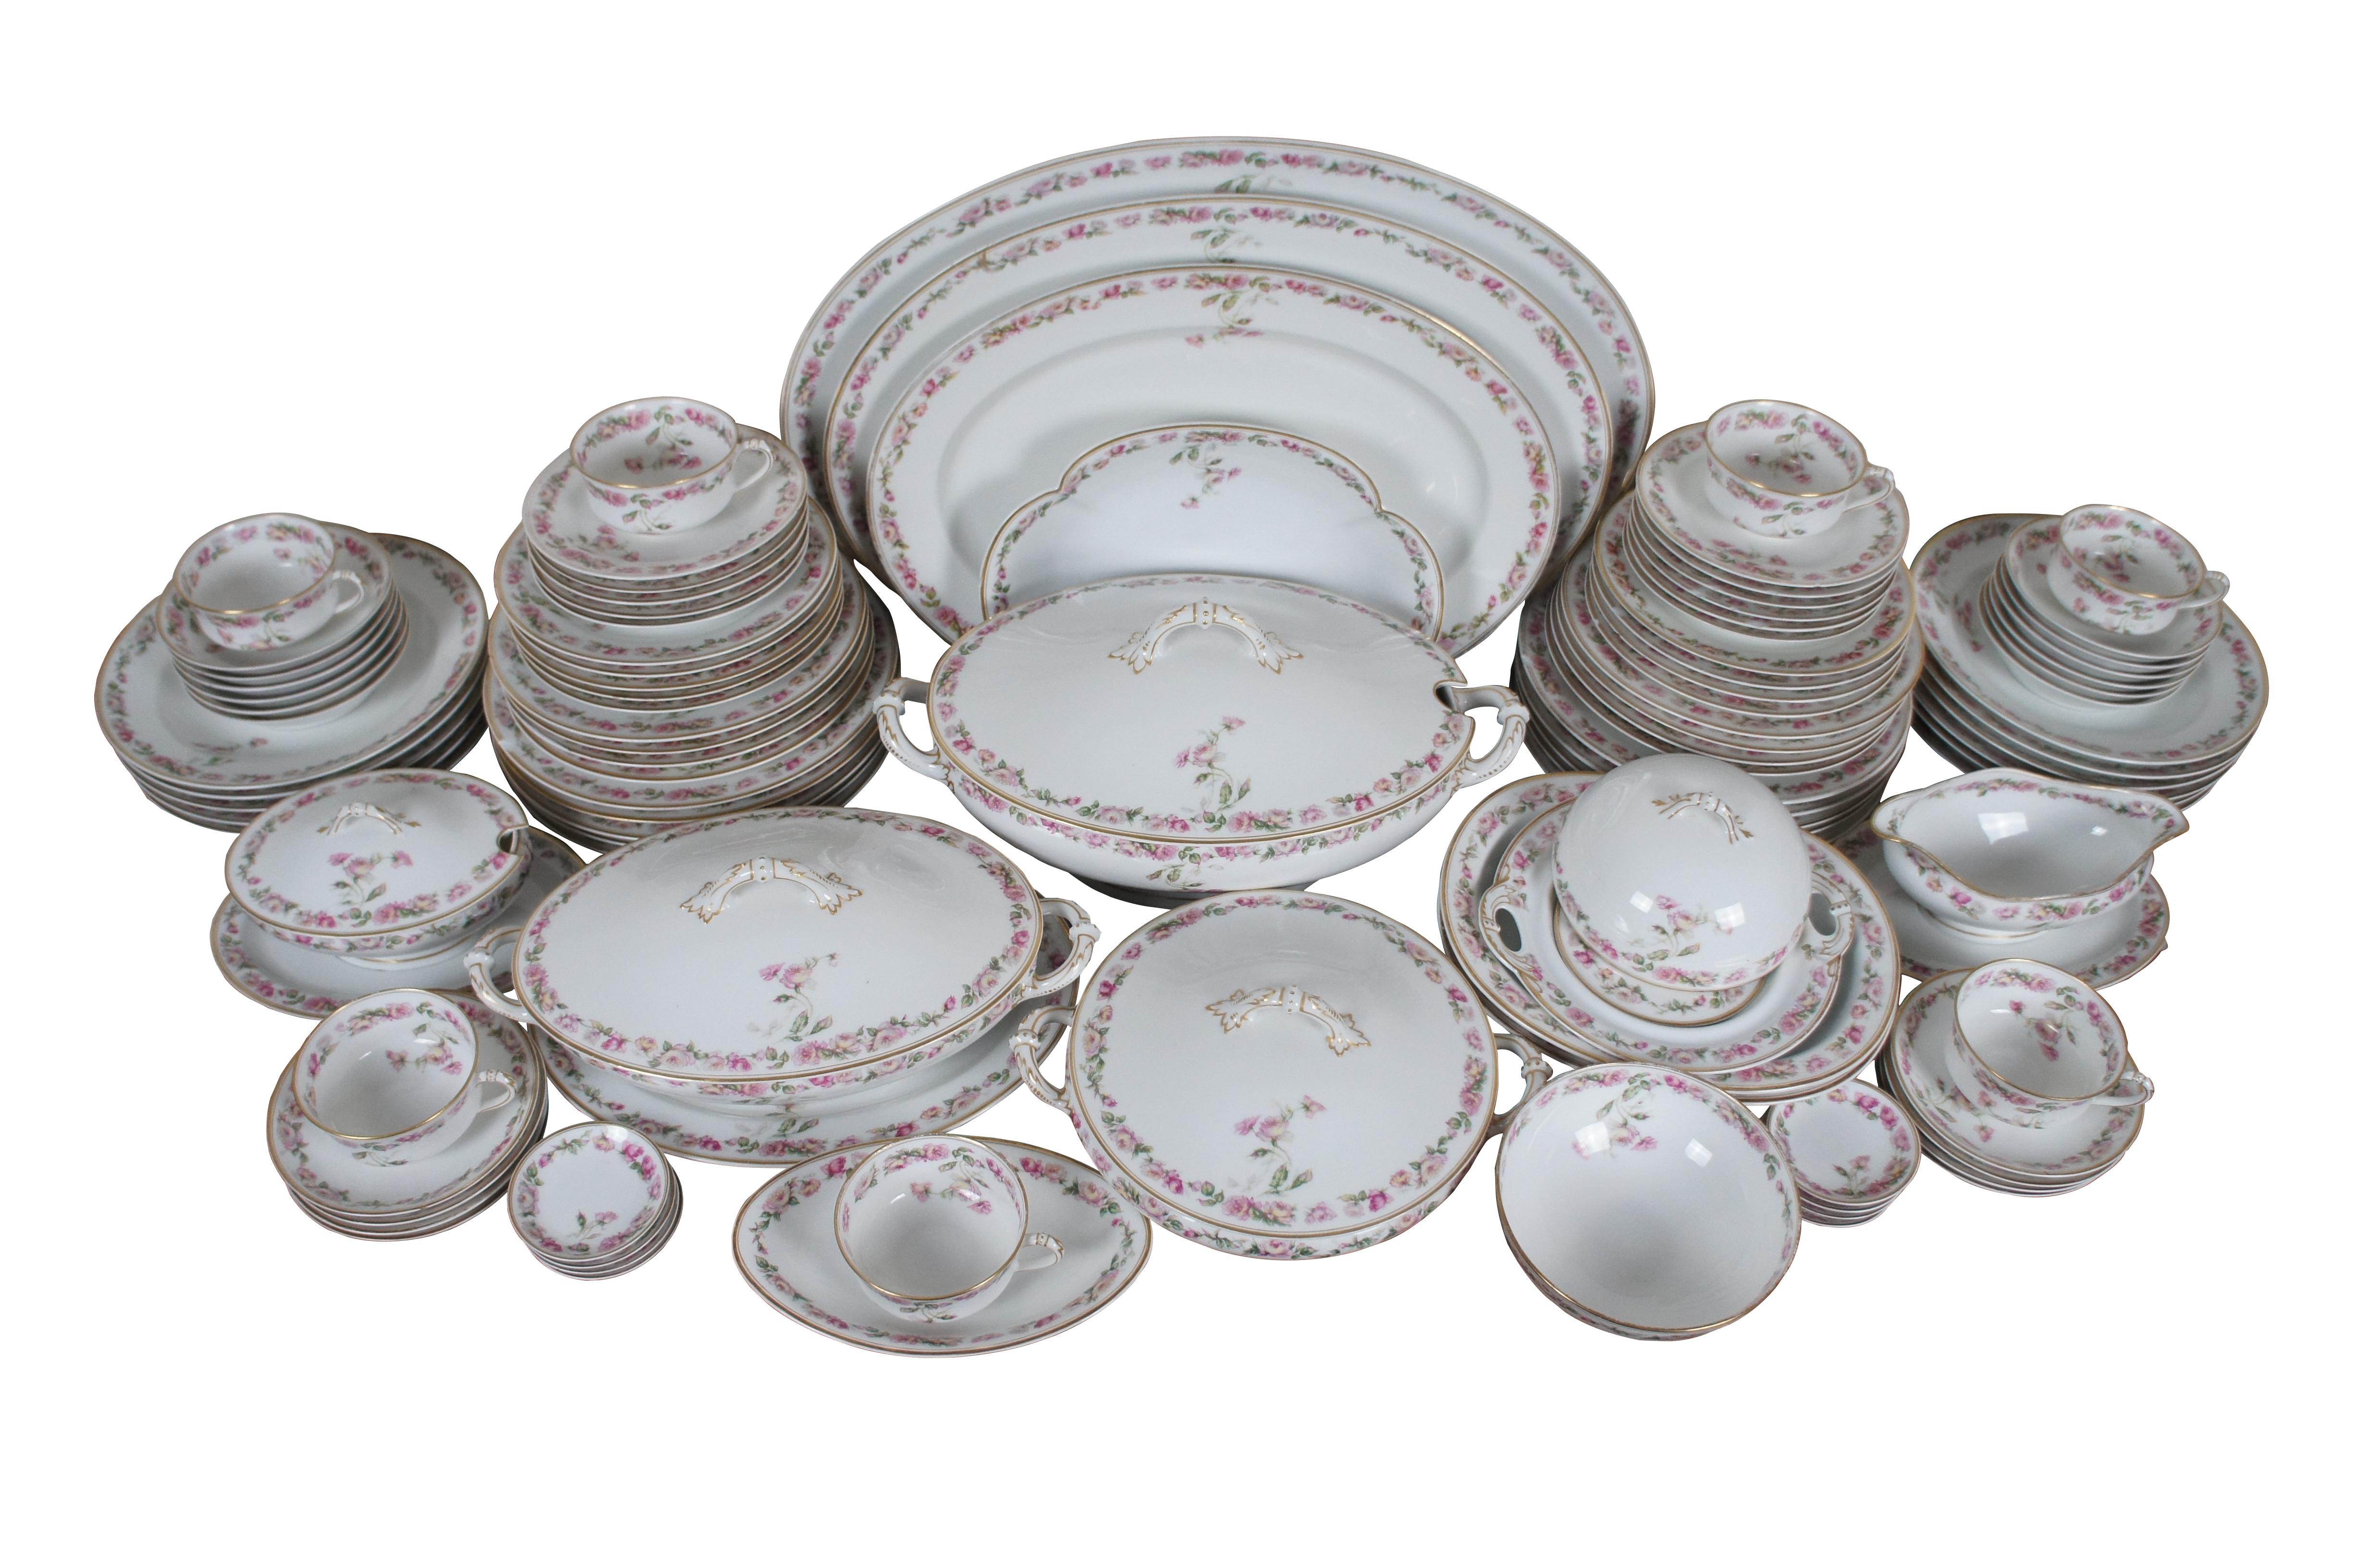 A large and impressive antique 106 piece set of Limoges porcelain dinnerware produced by Haviland & Company in The Amstel pattern (aka Schleiger, number 497A), for the Jones, McDuffie and Stratton Company. Pattern features double lined gilt edges